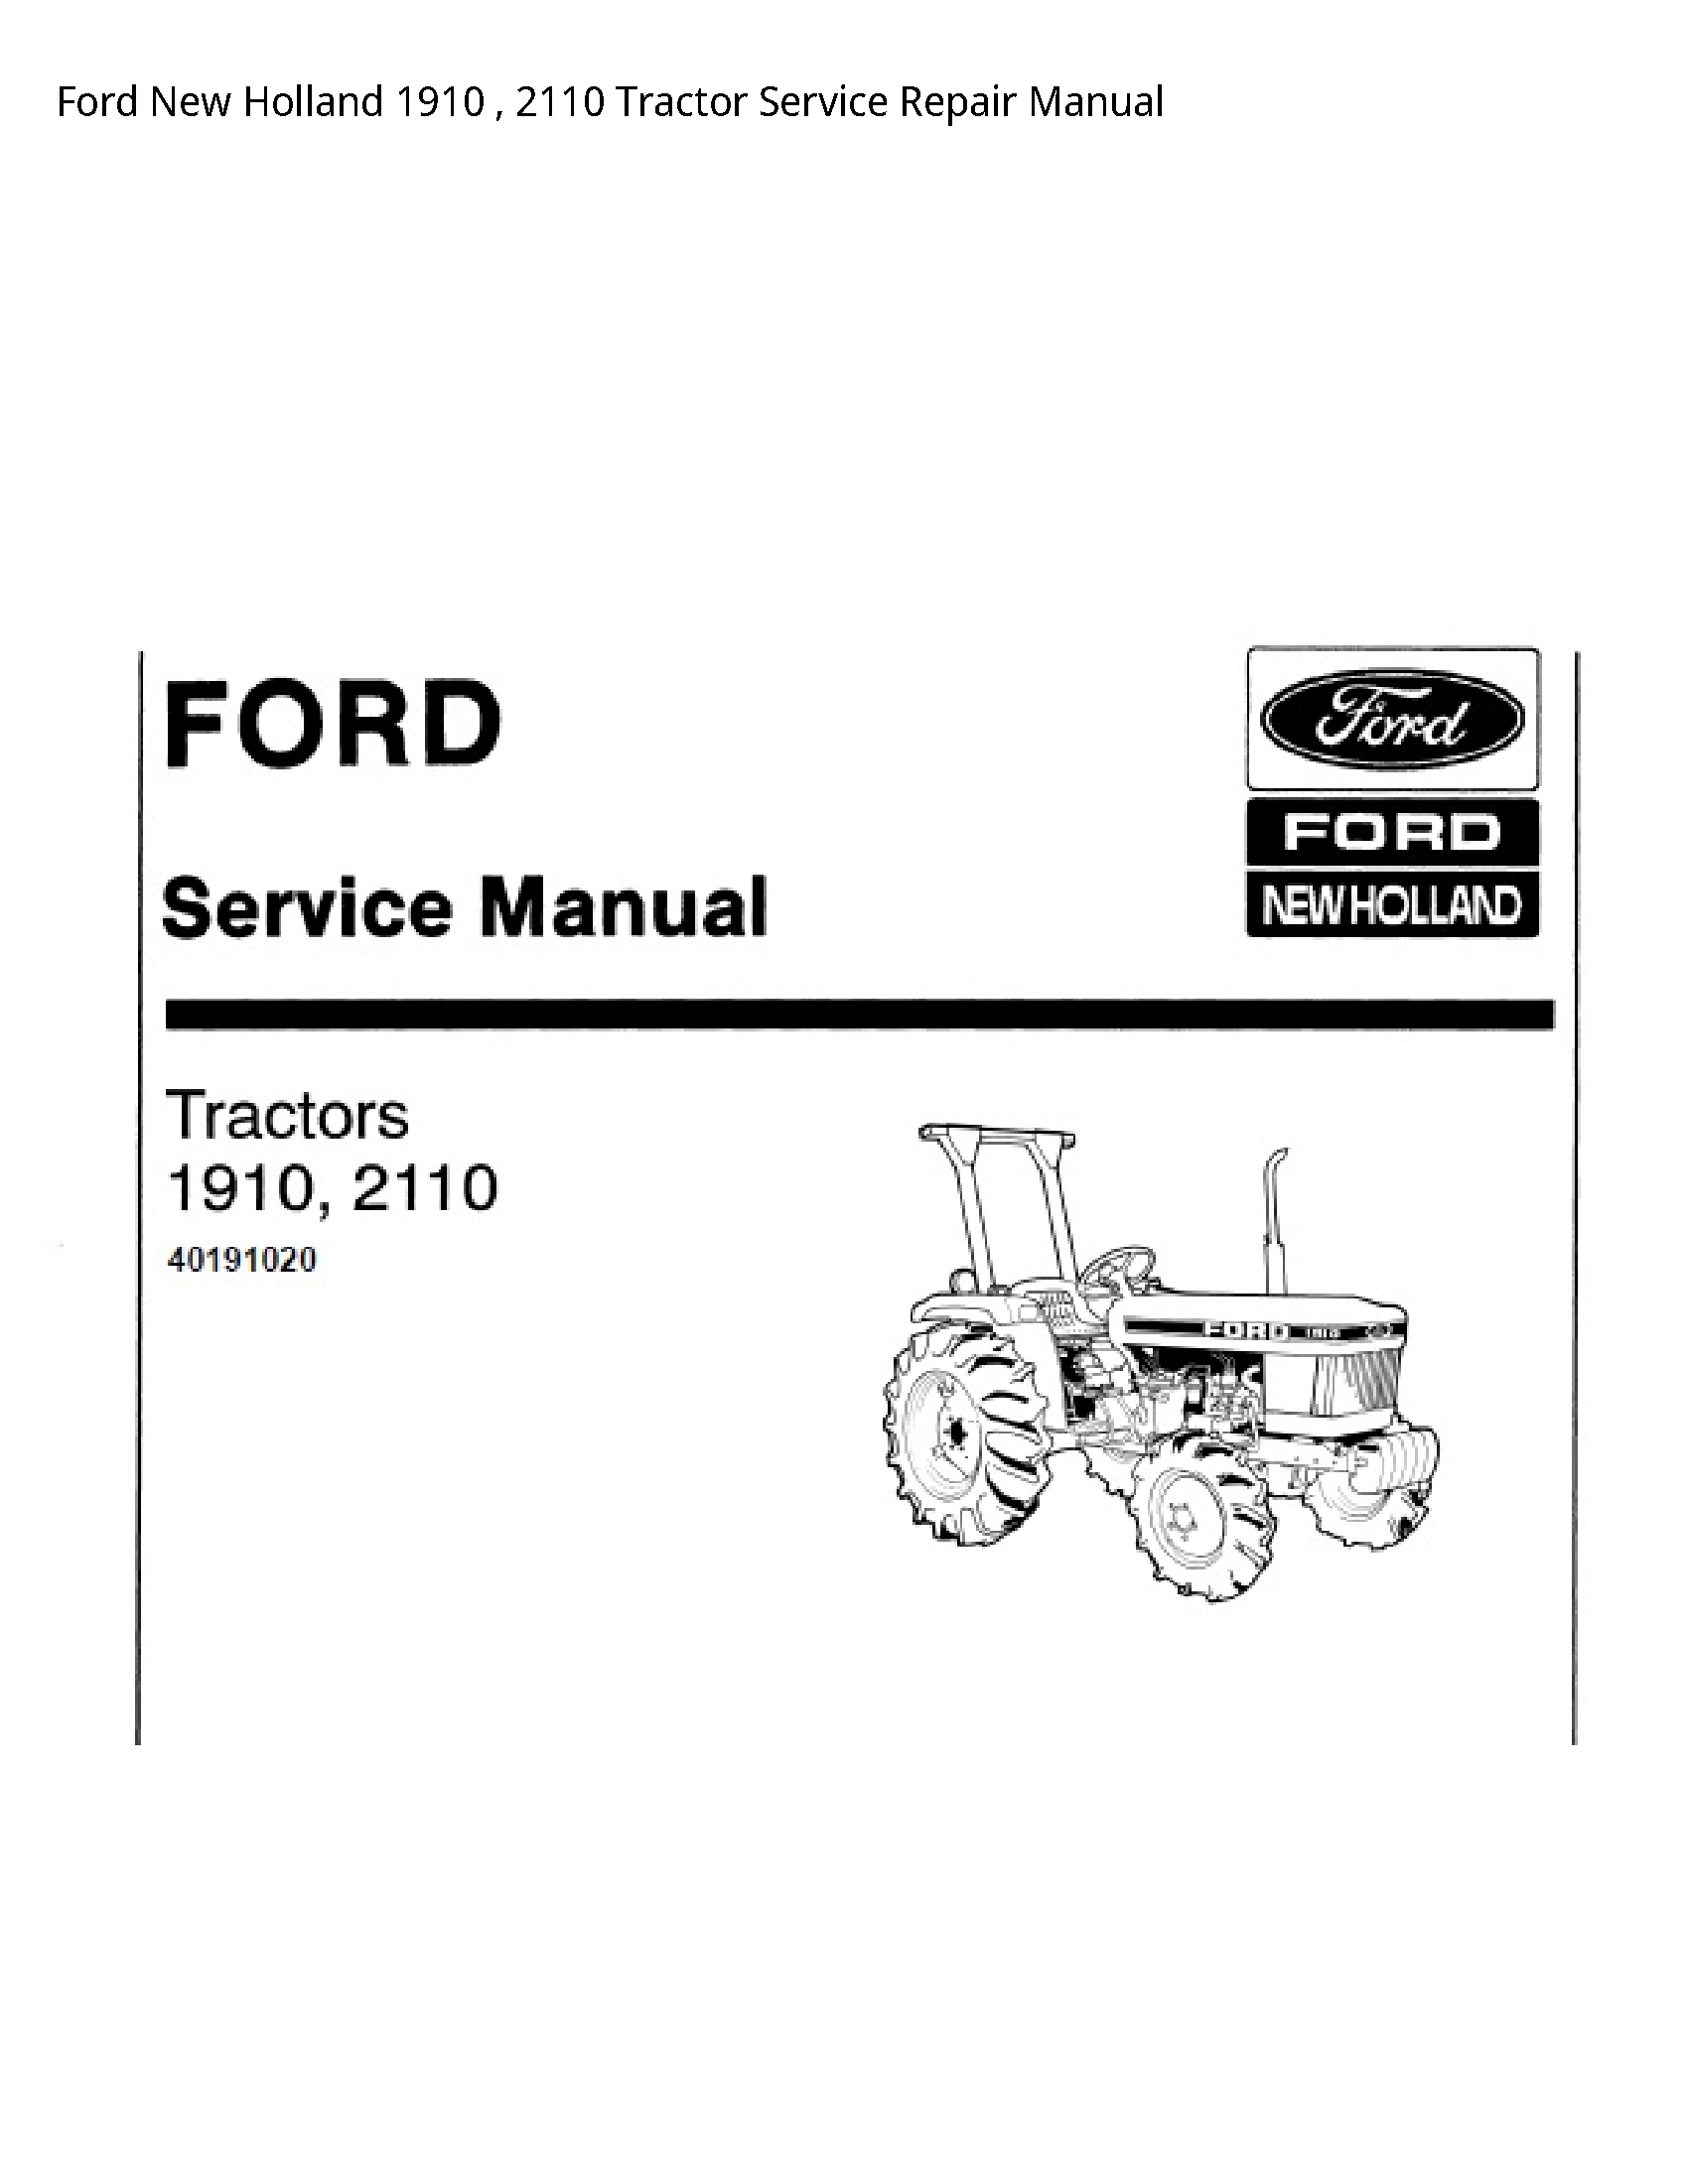  1910 Tractor manual